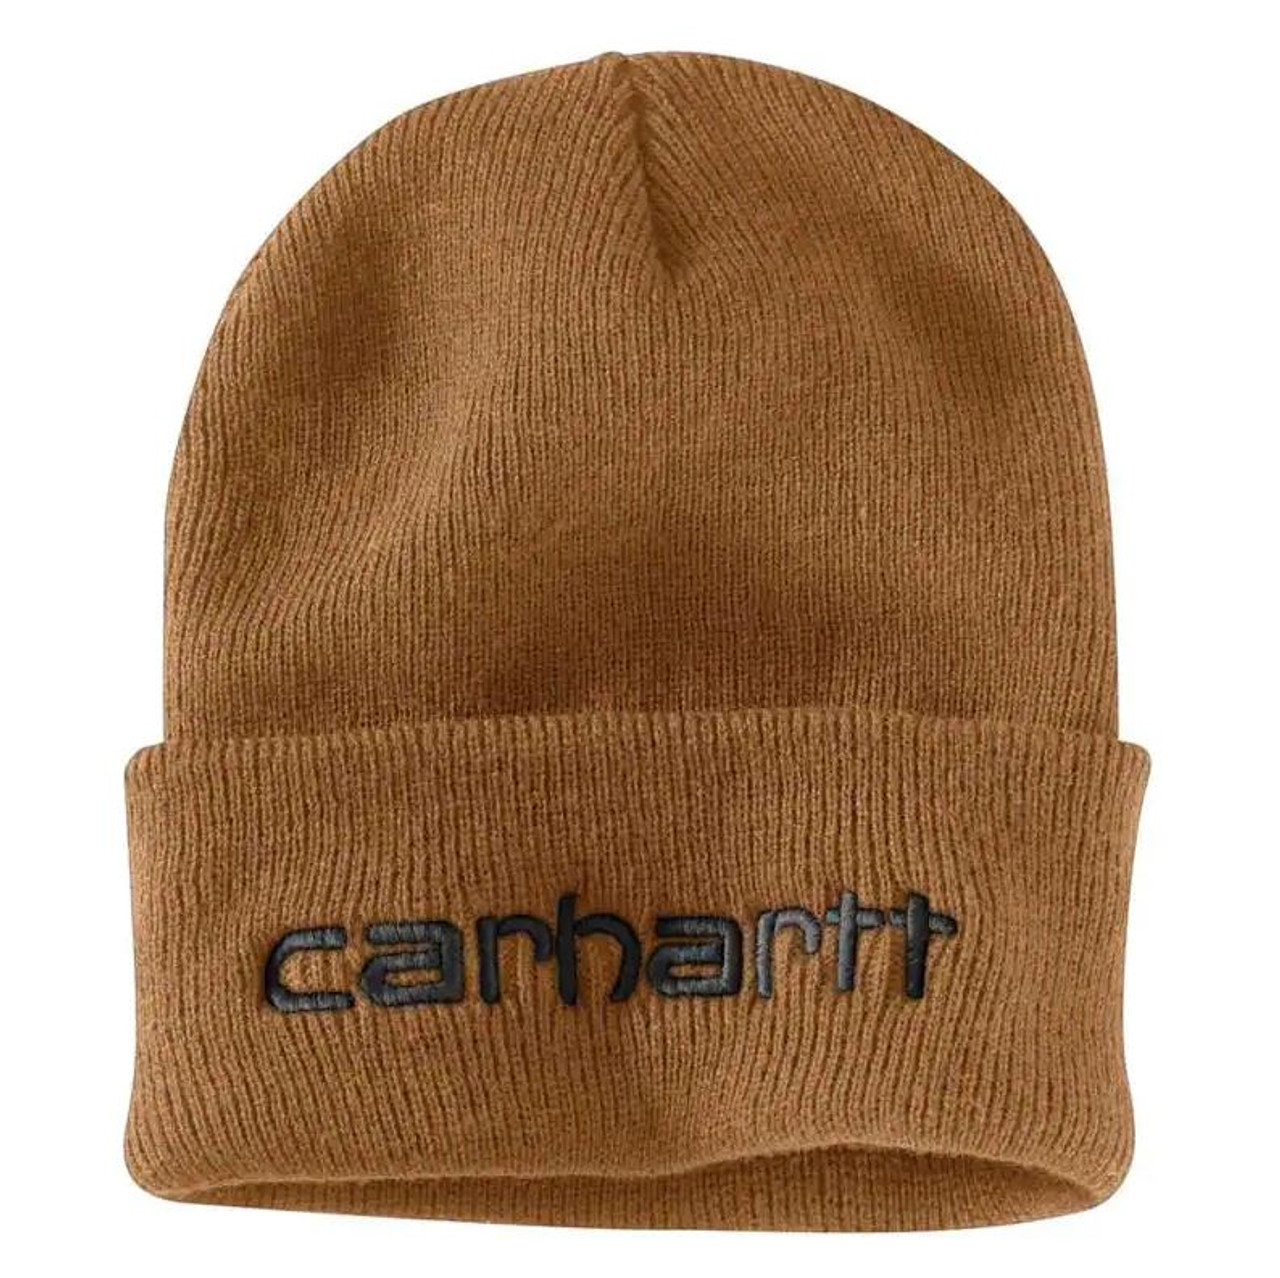 Knit Insulated Logo Graphic Cuffed Beanie - Carhartt Brown - Ramsey Outdoor